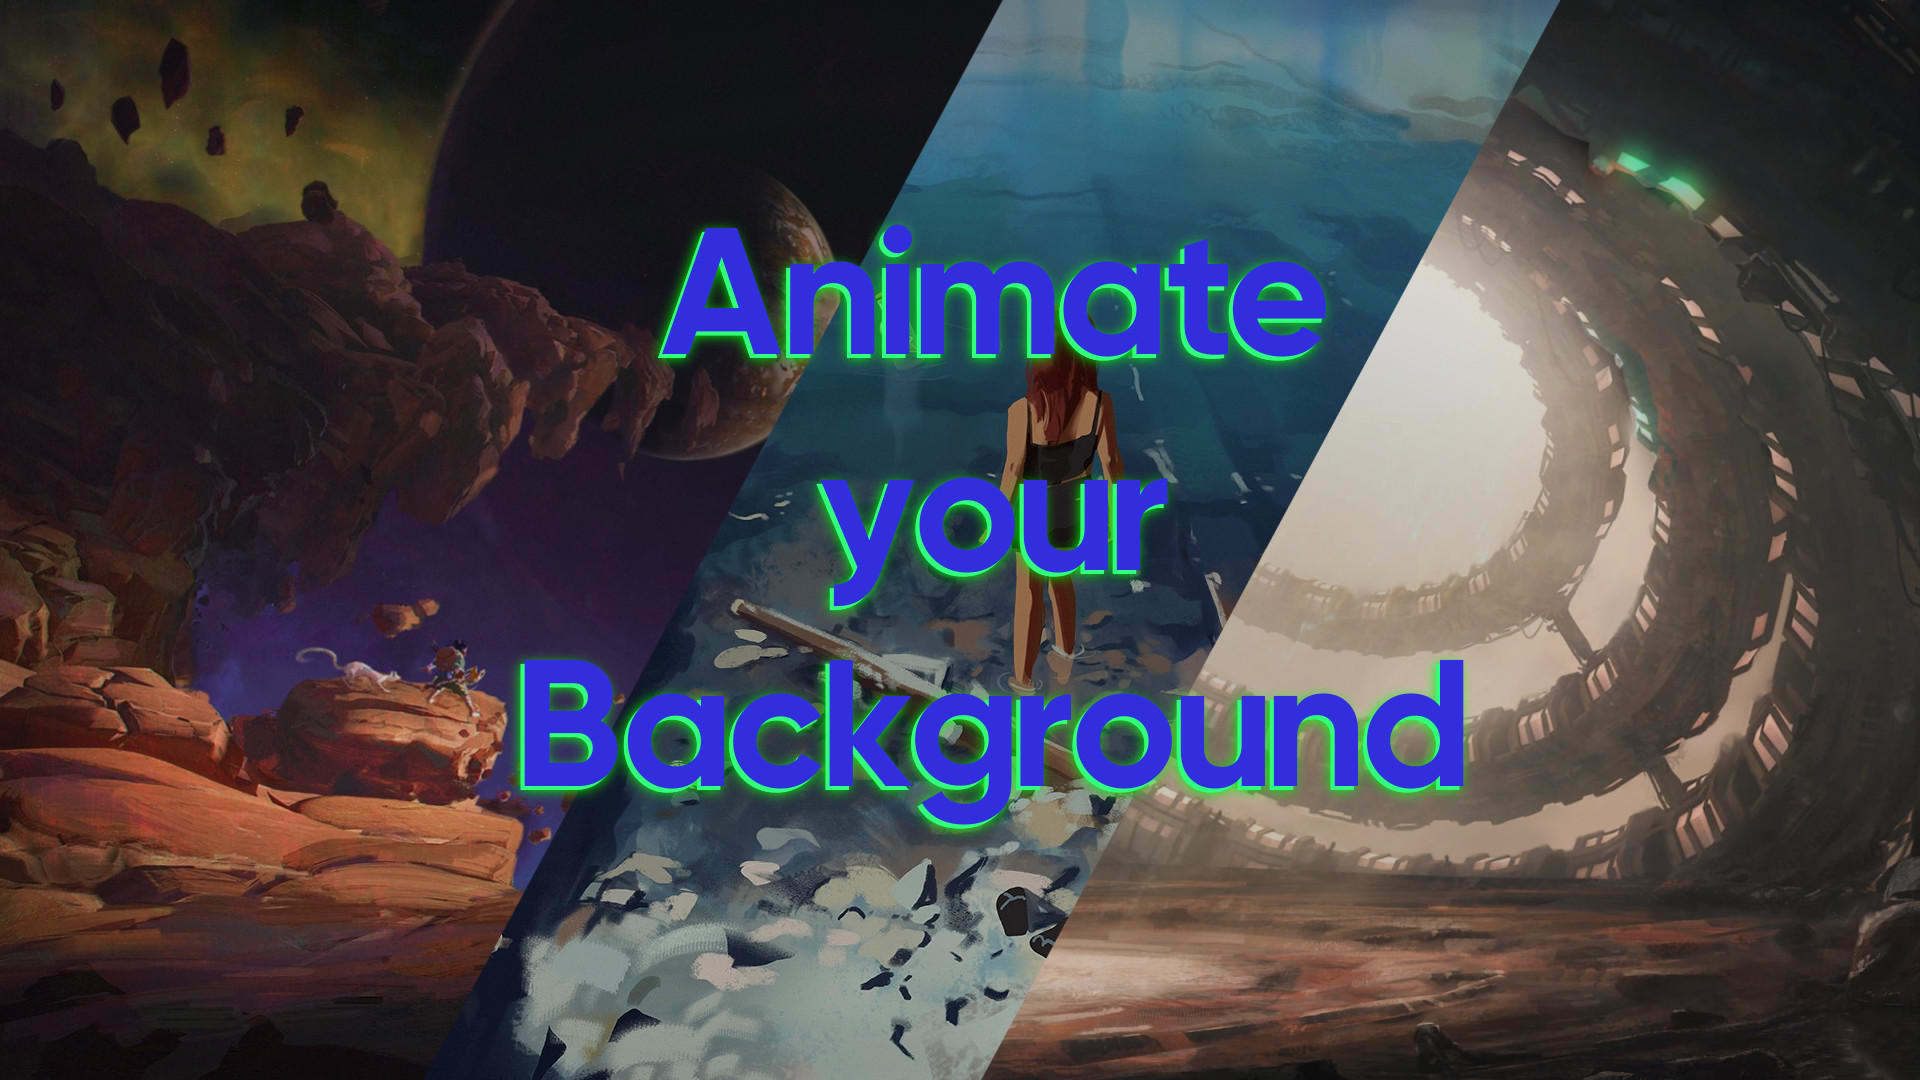 Animate your background for youtube music video by Maximulyamus | Fiverr